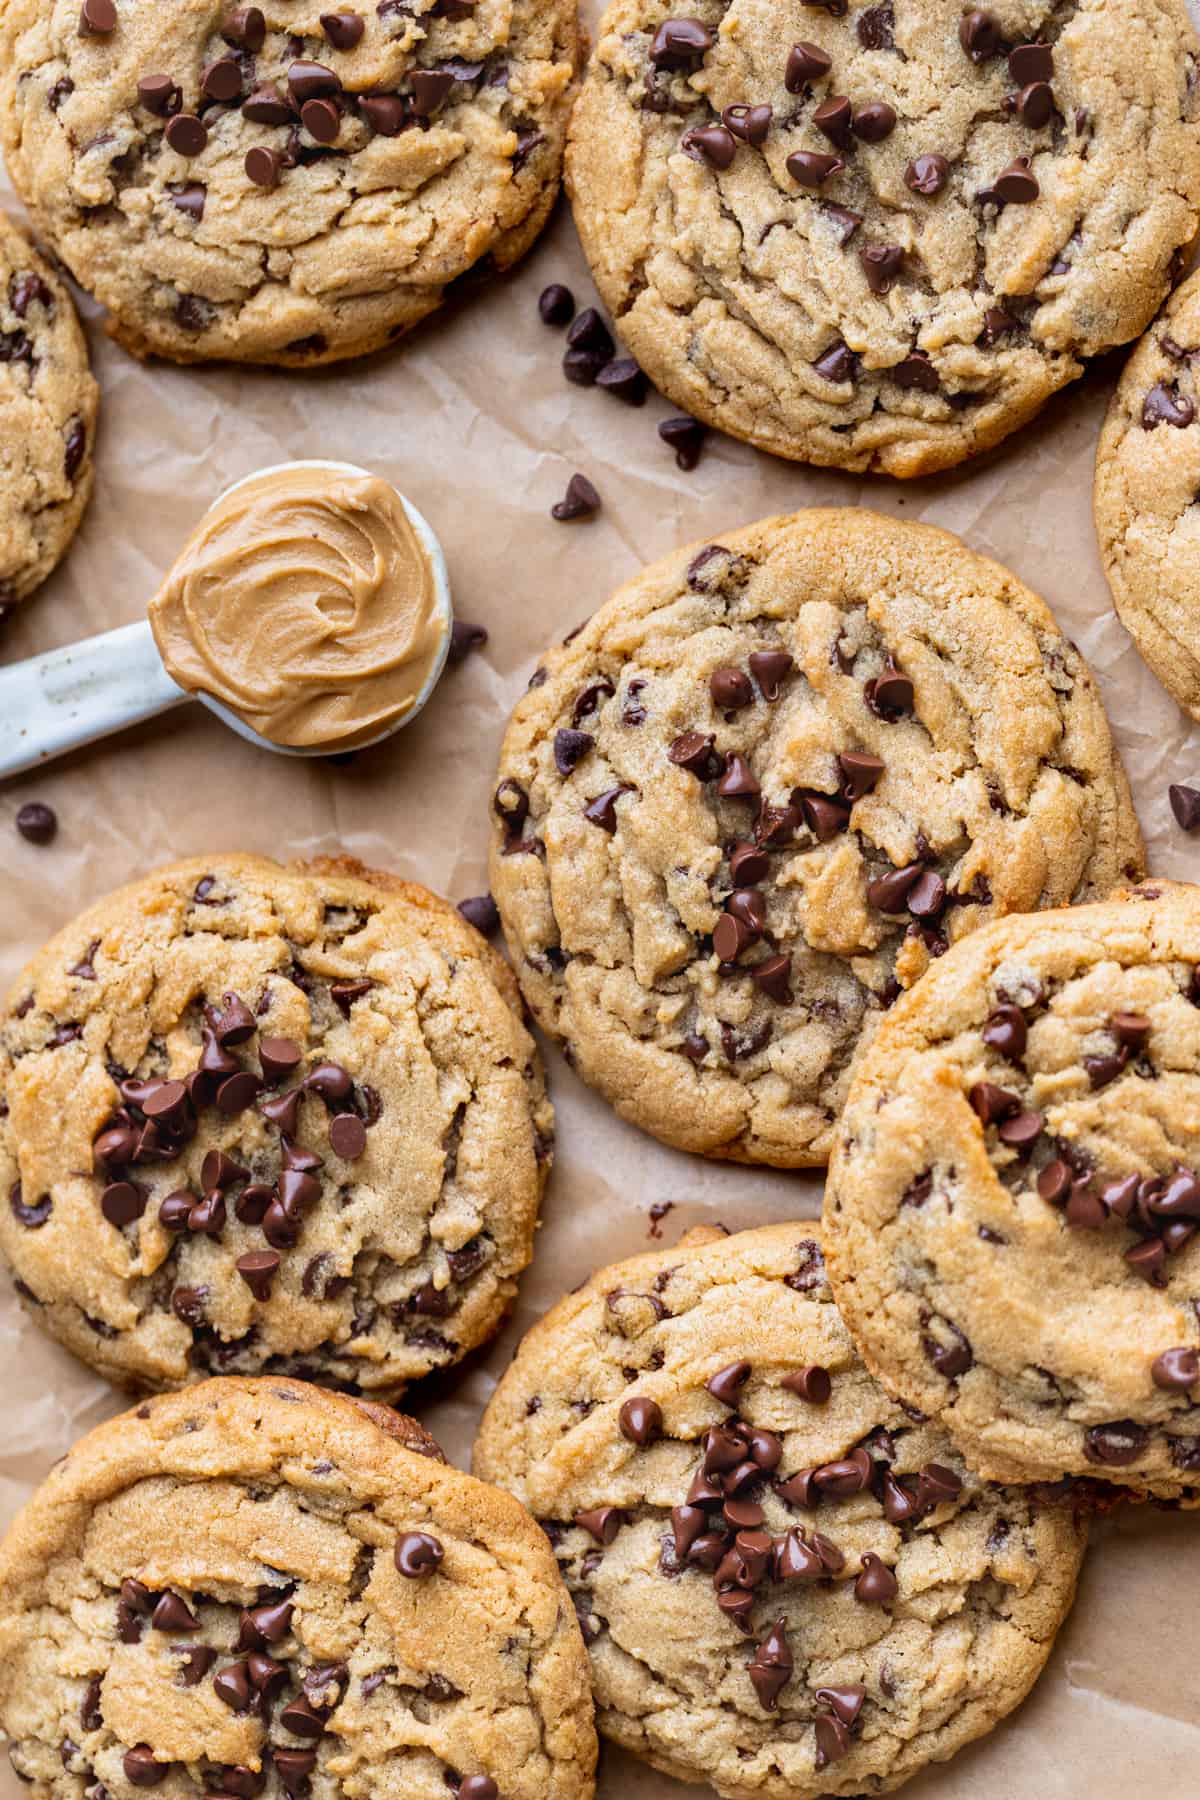 Peanut butter chocolate chip cookies on parchment paper.